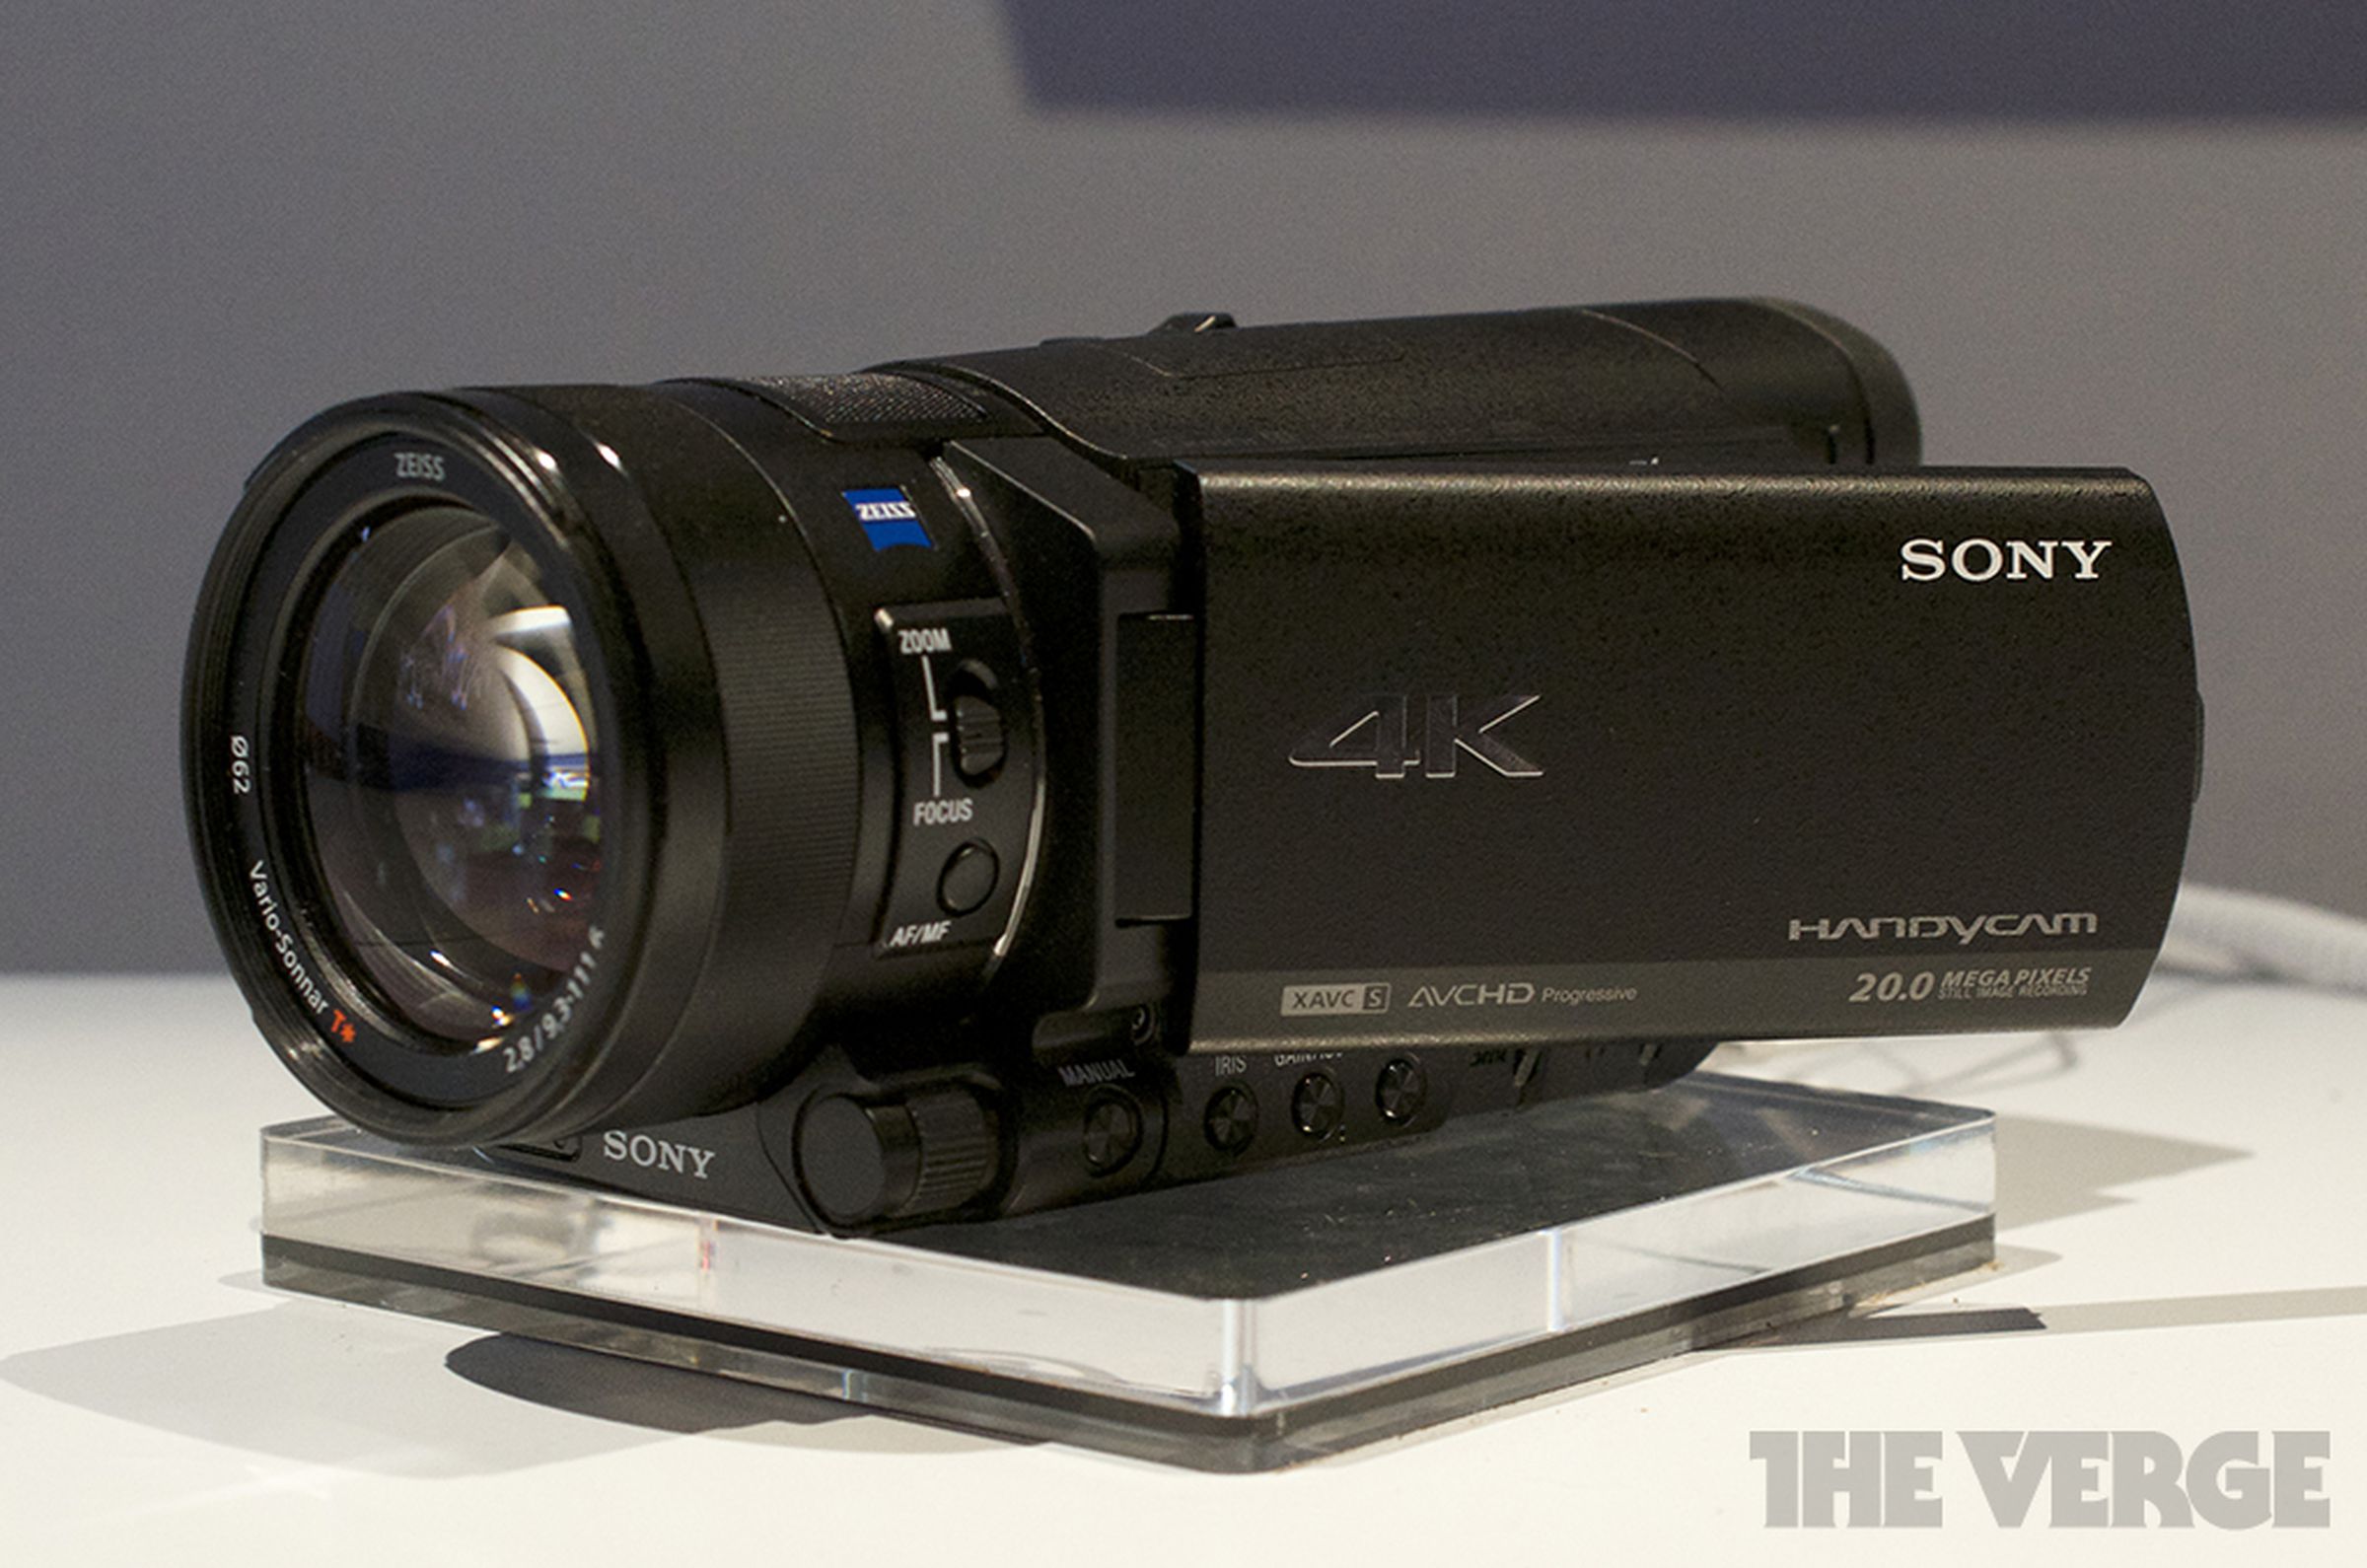 Sony FDR-AX100 4K Handycam hands-on images